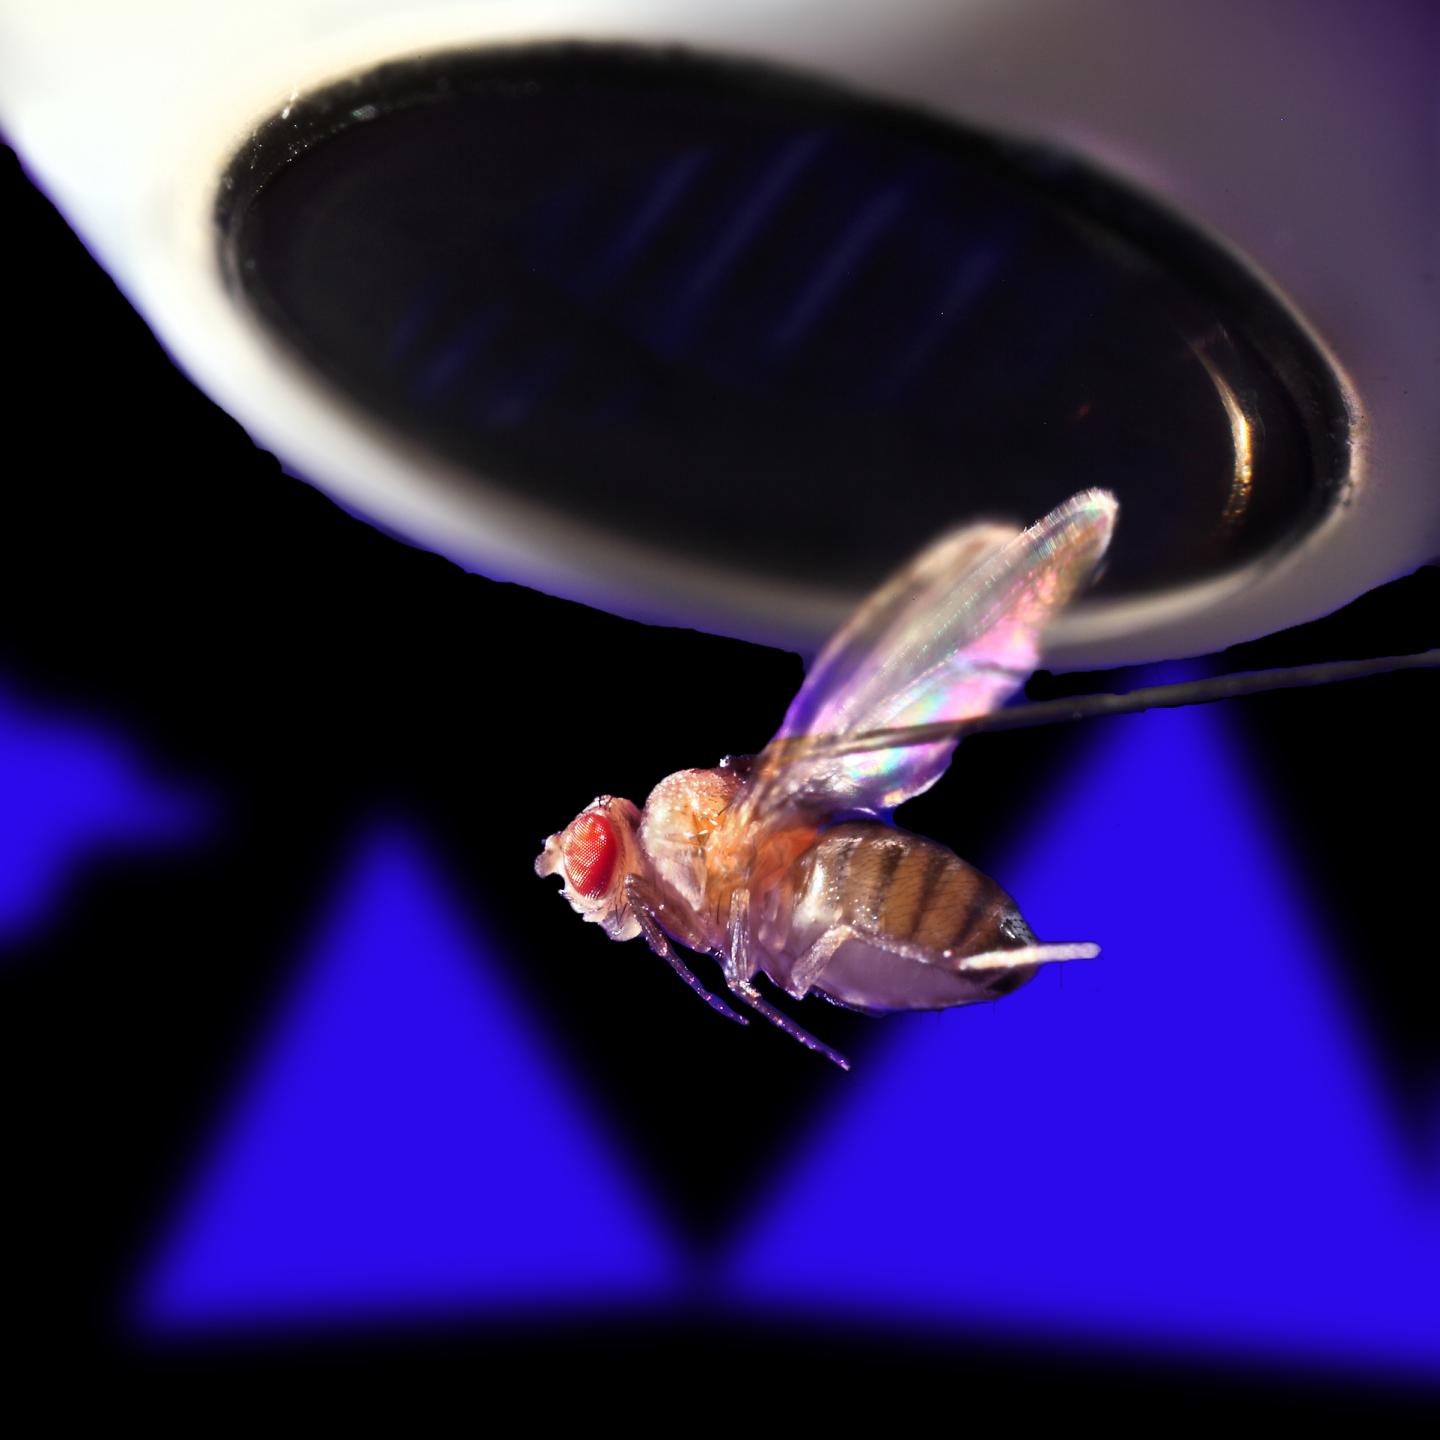 Tethered Fruit Fly